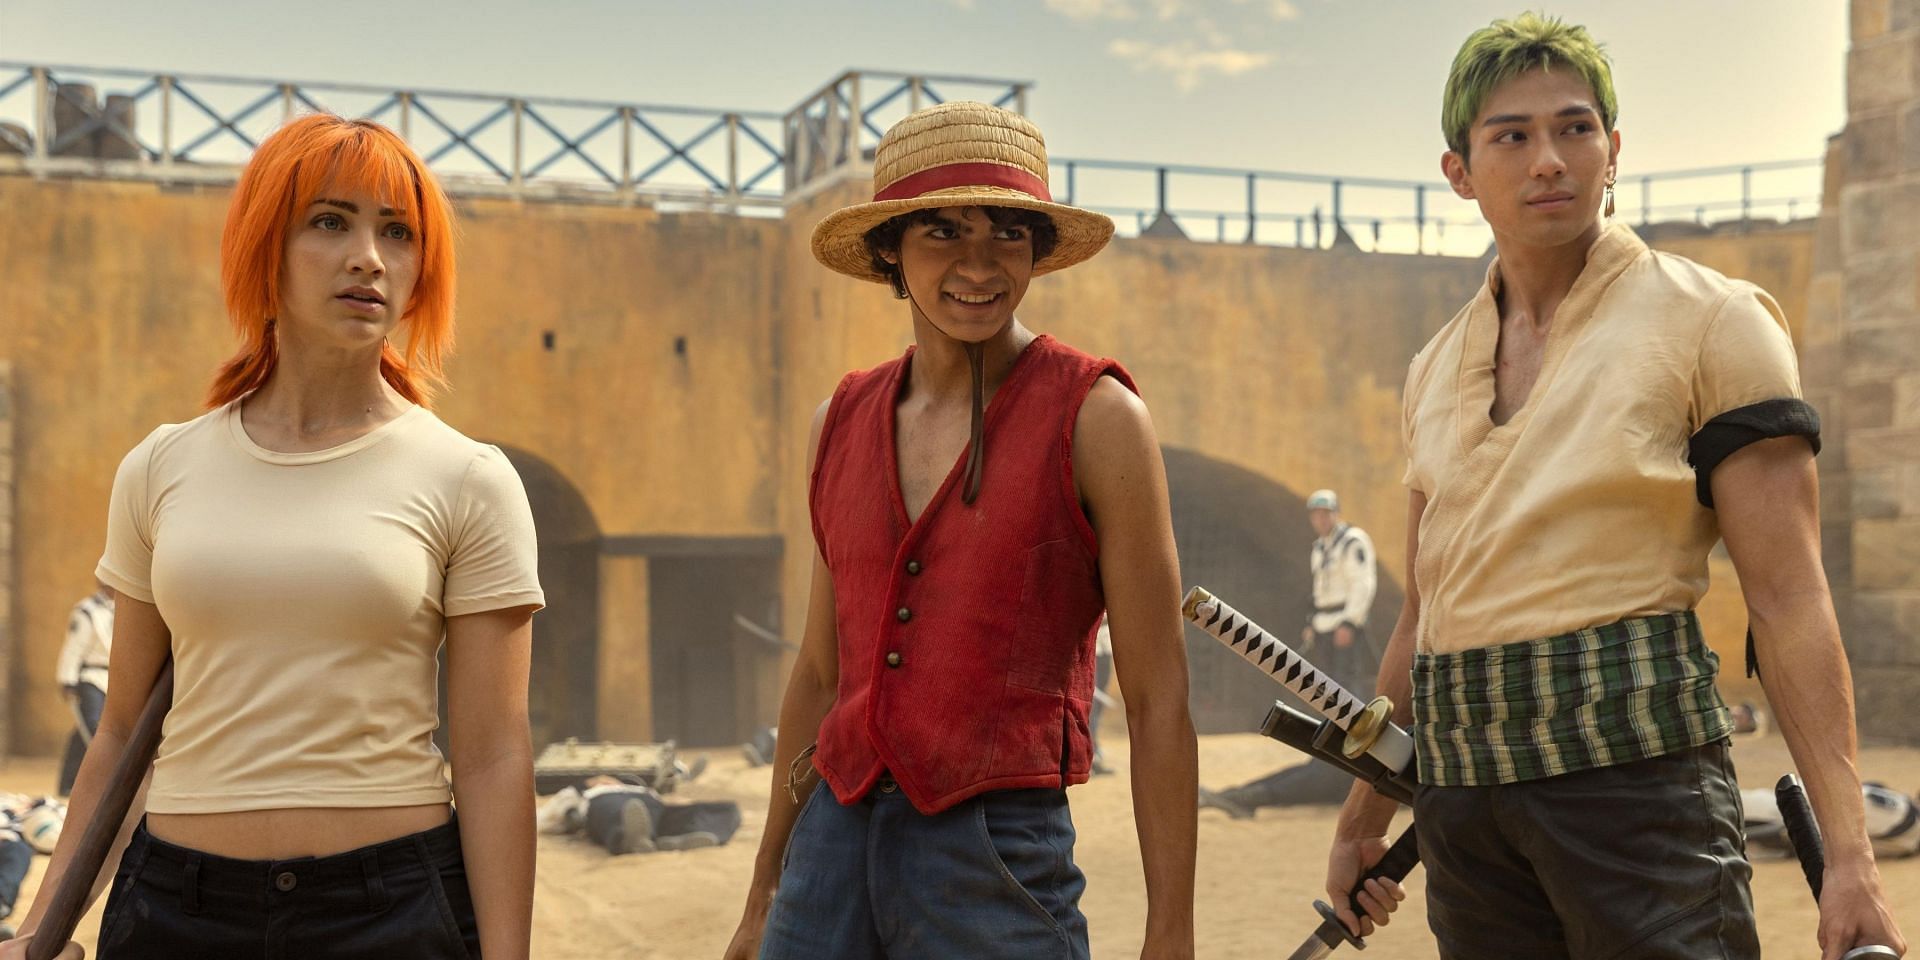 Nami, Luffy, and Zoro as seen in One Piece live-action (Image via Netflix)